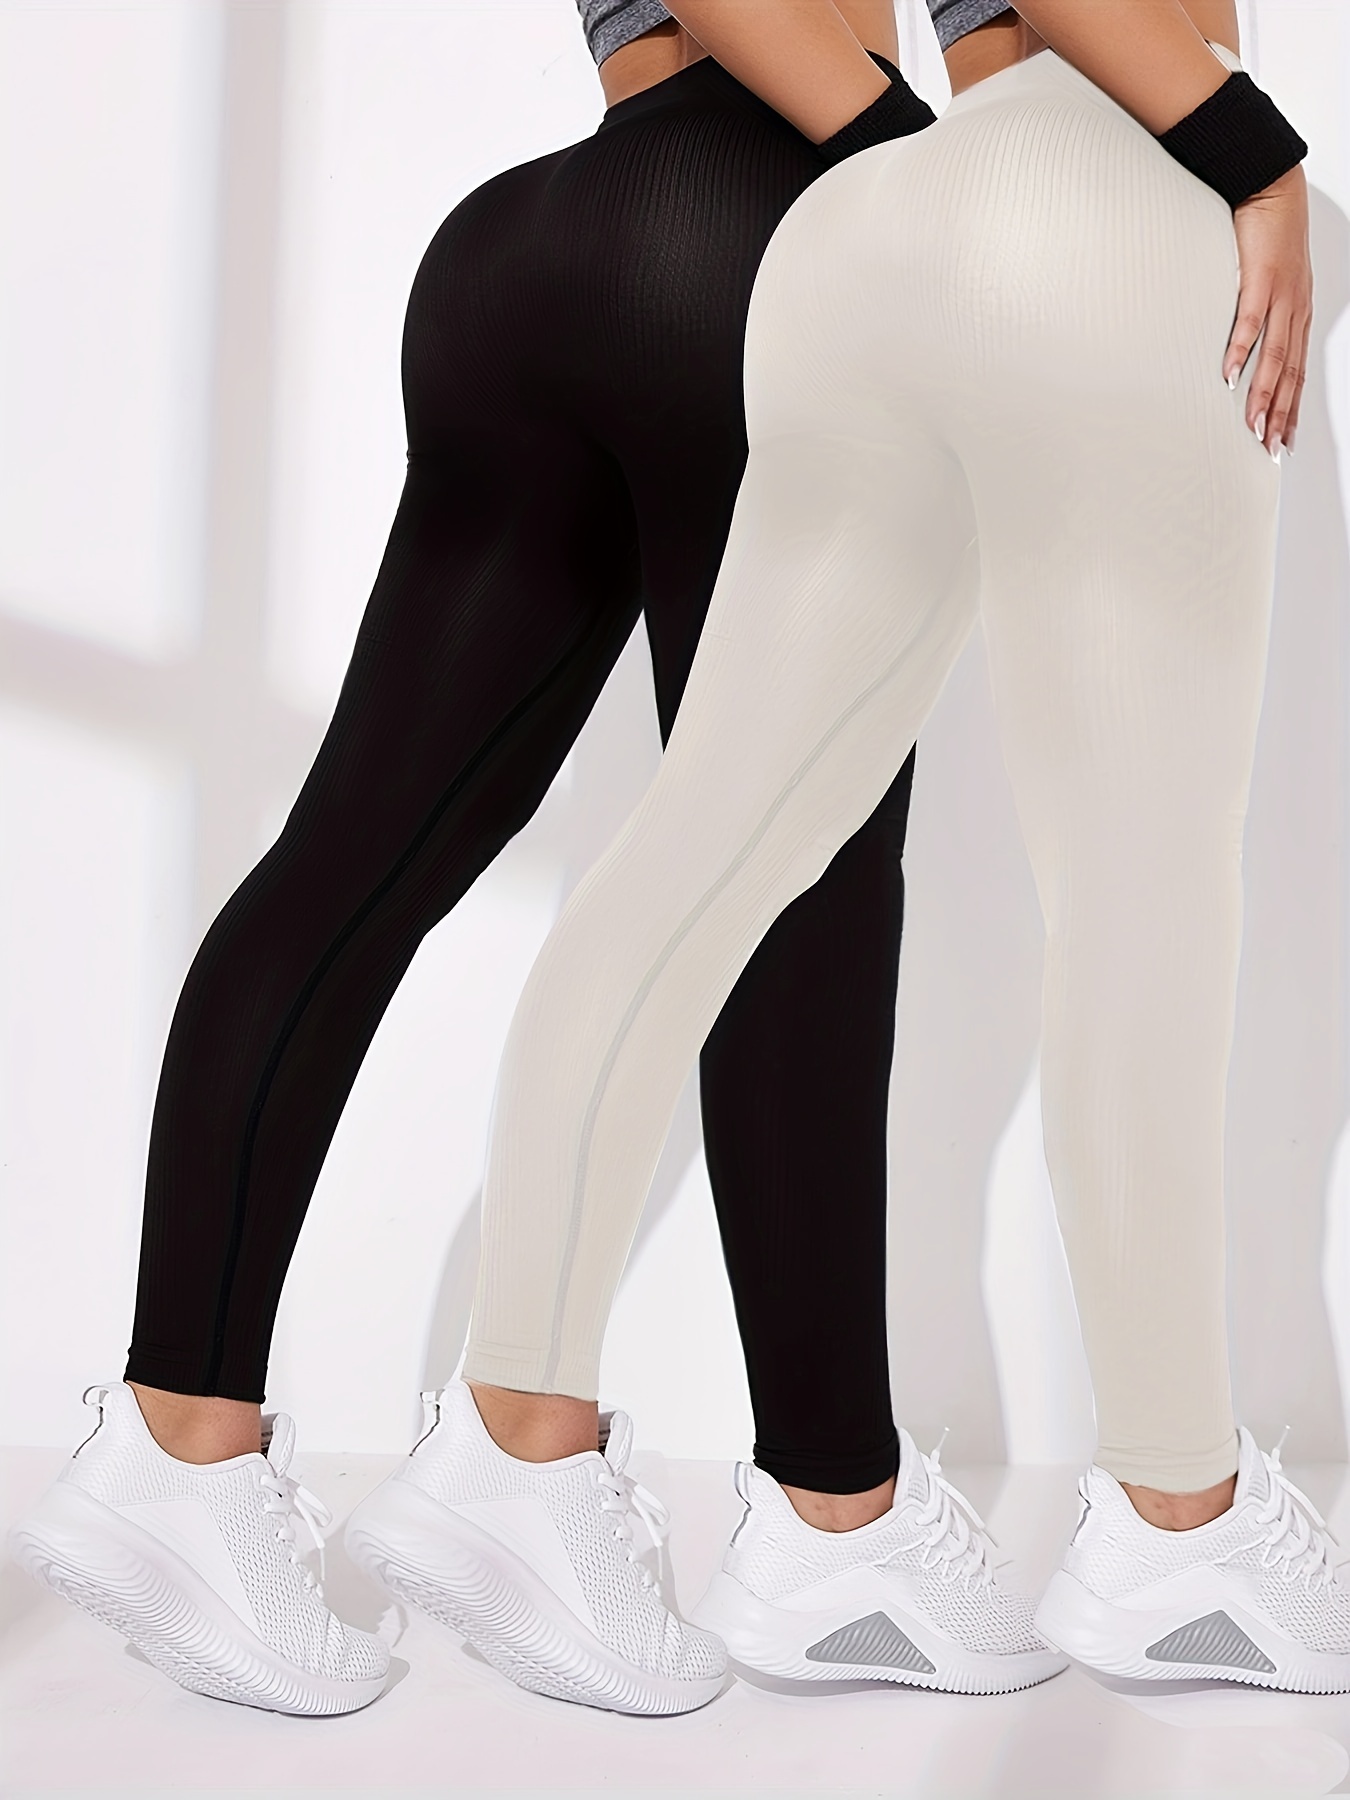 High Waisted Workout Leggings For Women, Tummy Control Soft Yoga Pants,  Women's Activewear